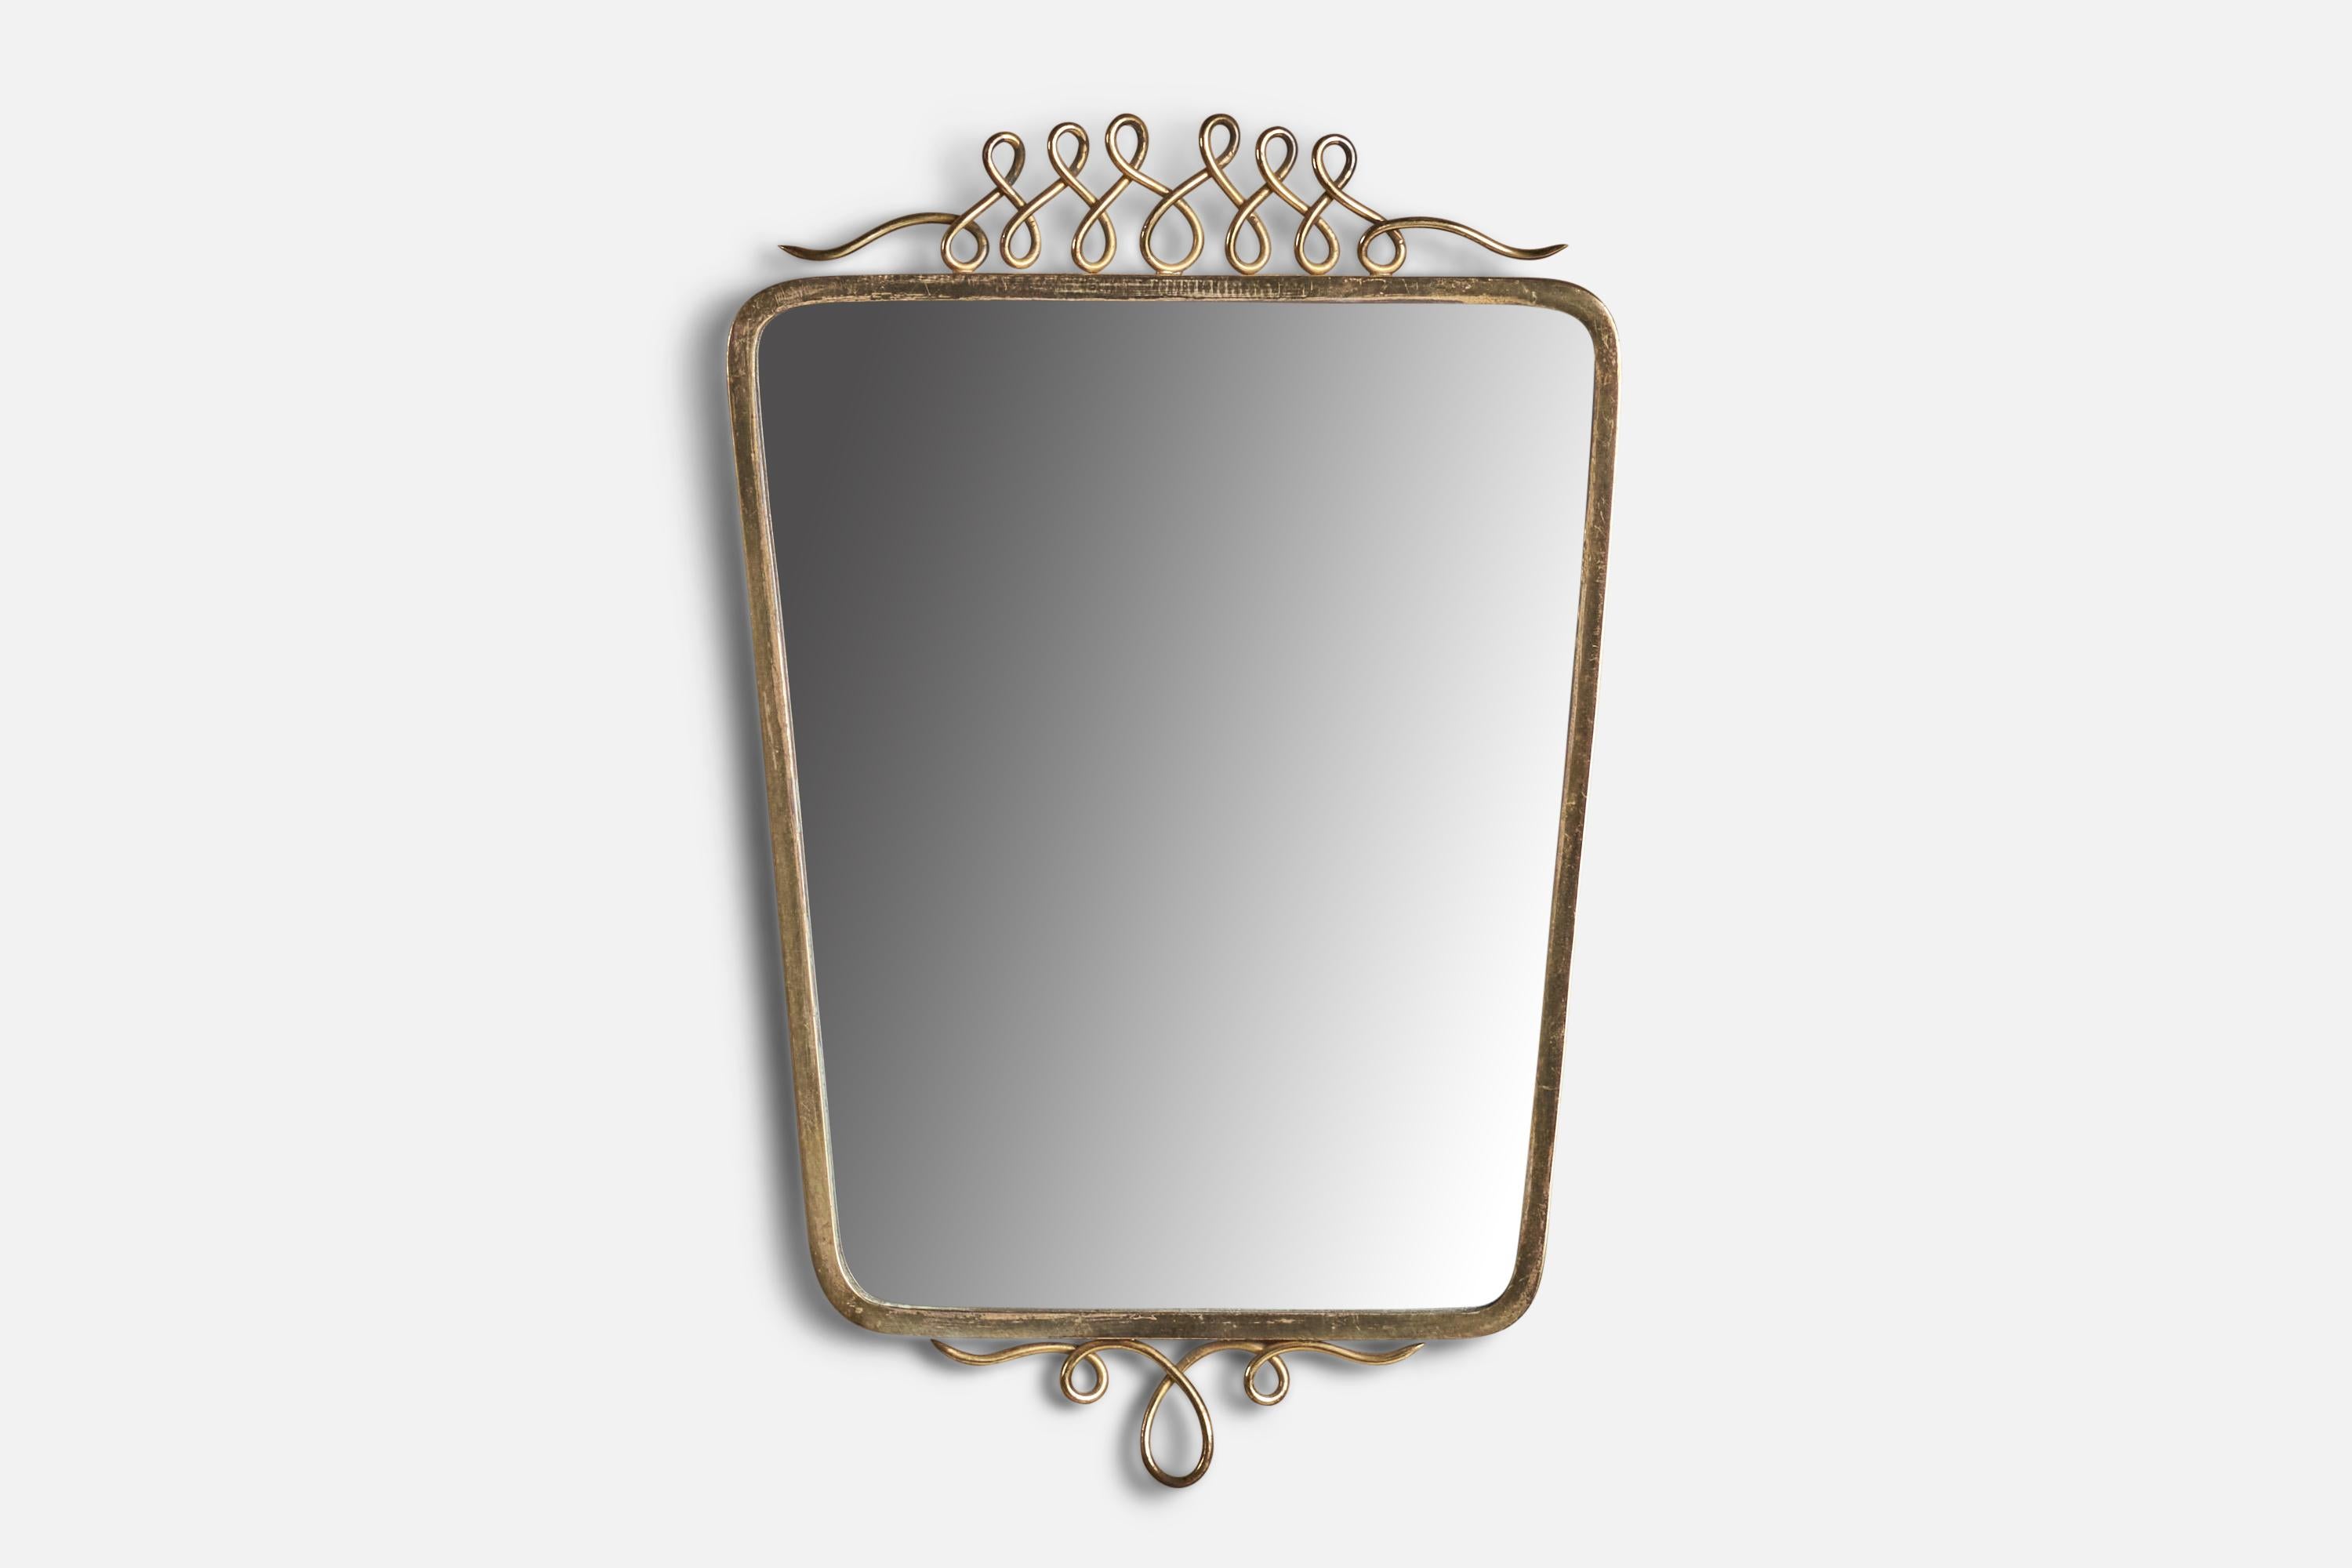 A brass mirror designed and produced in Italy, 1940s.